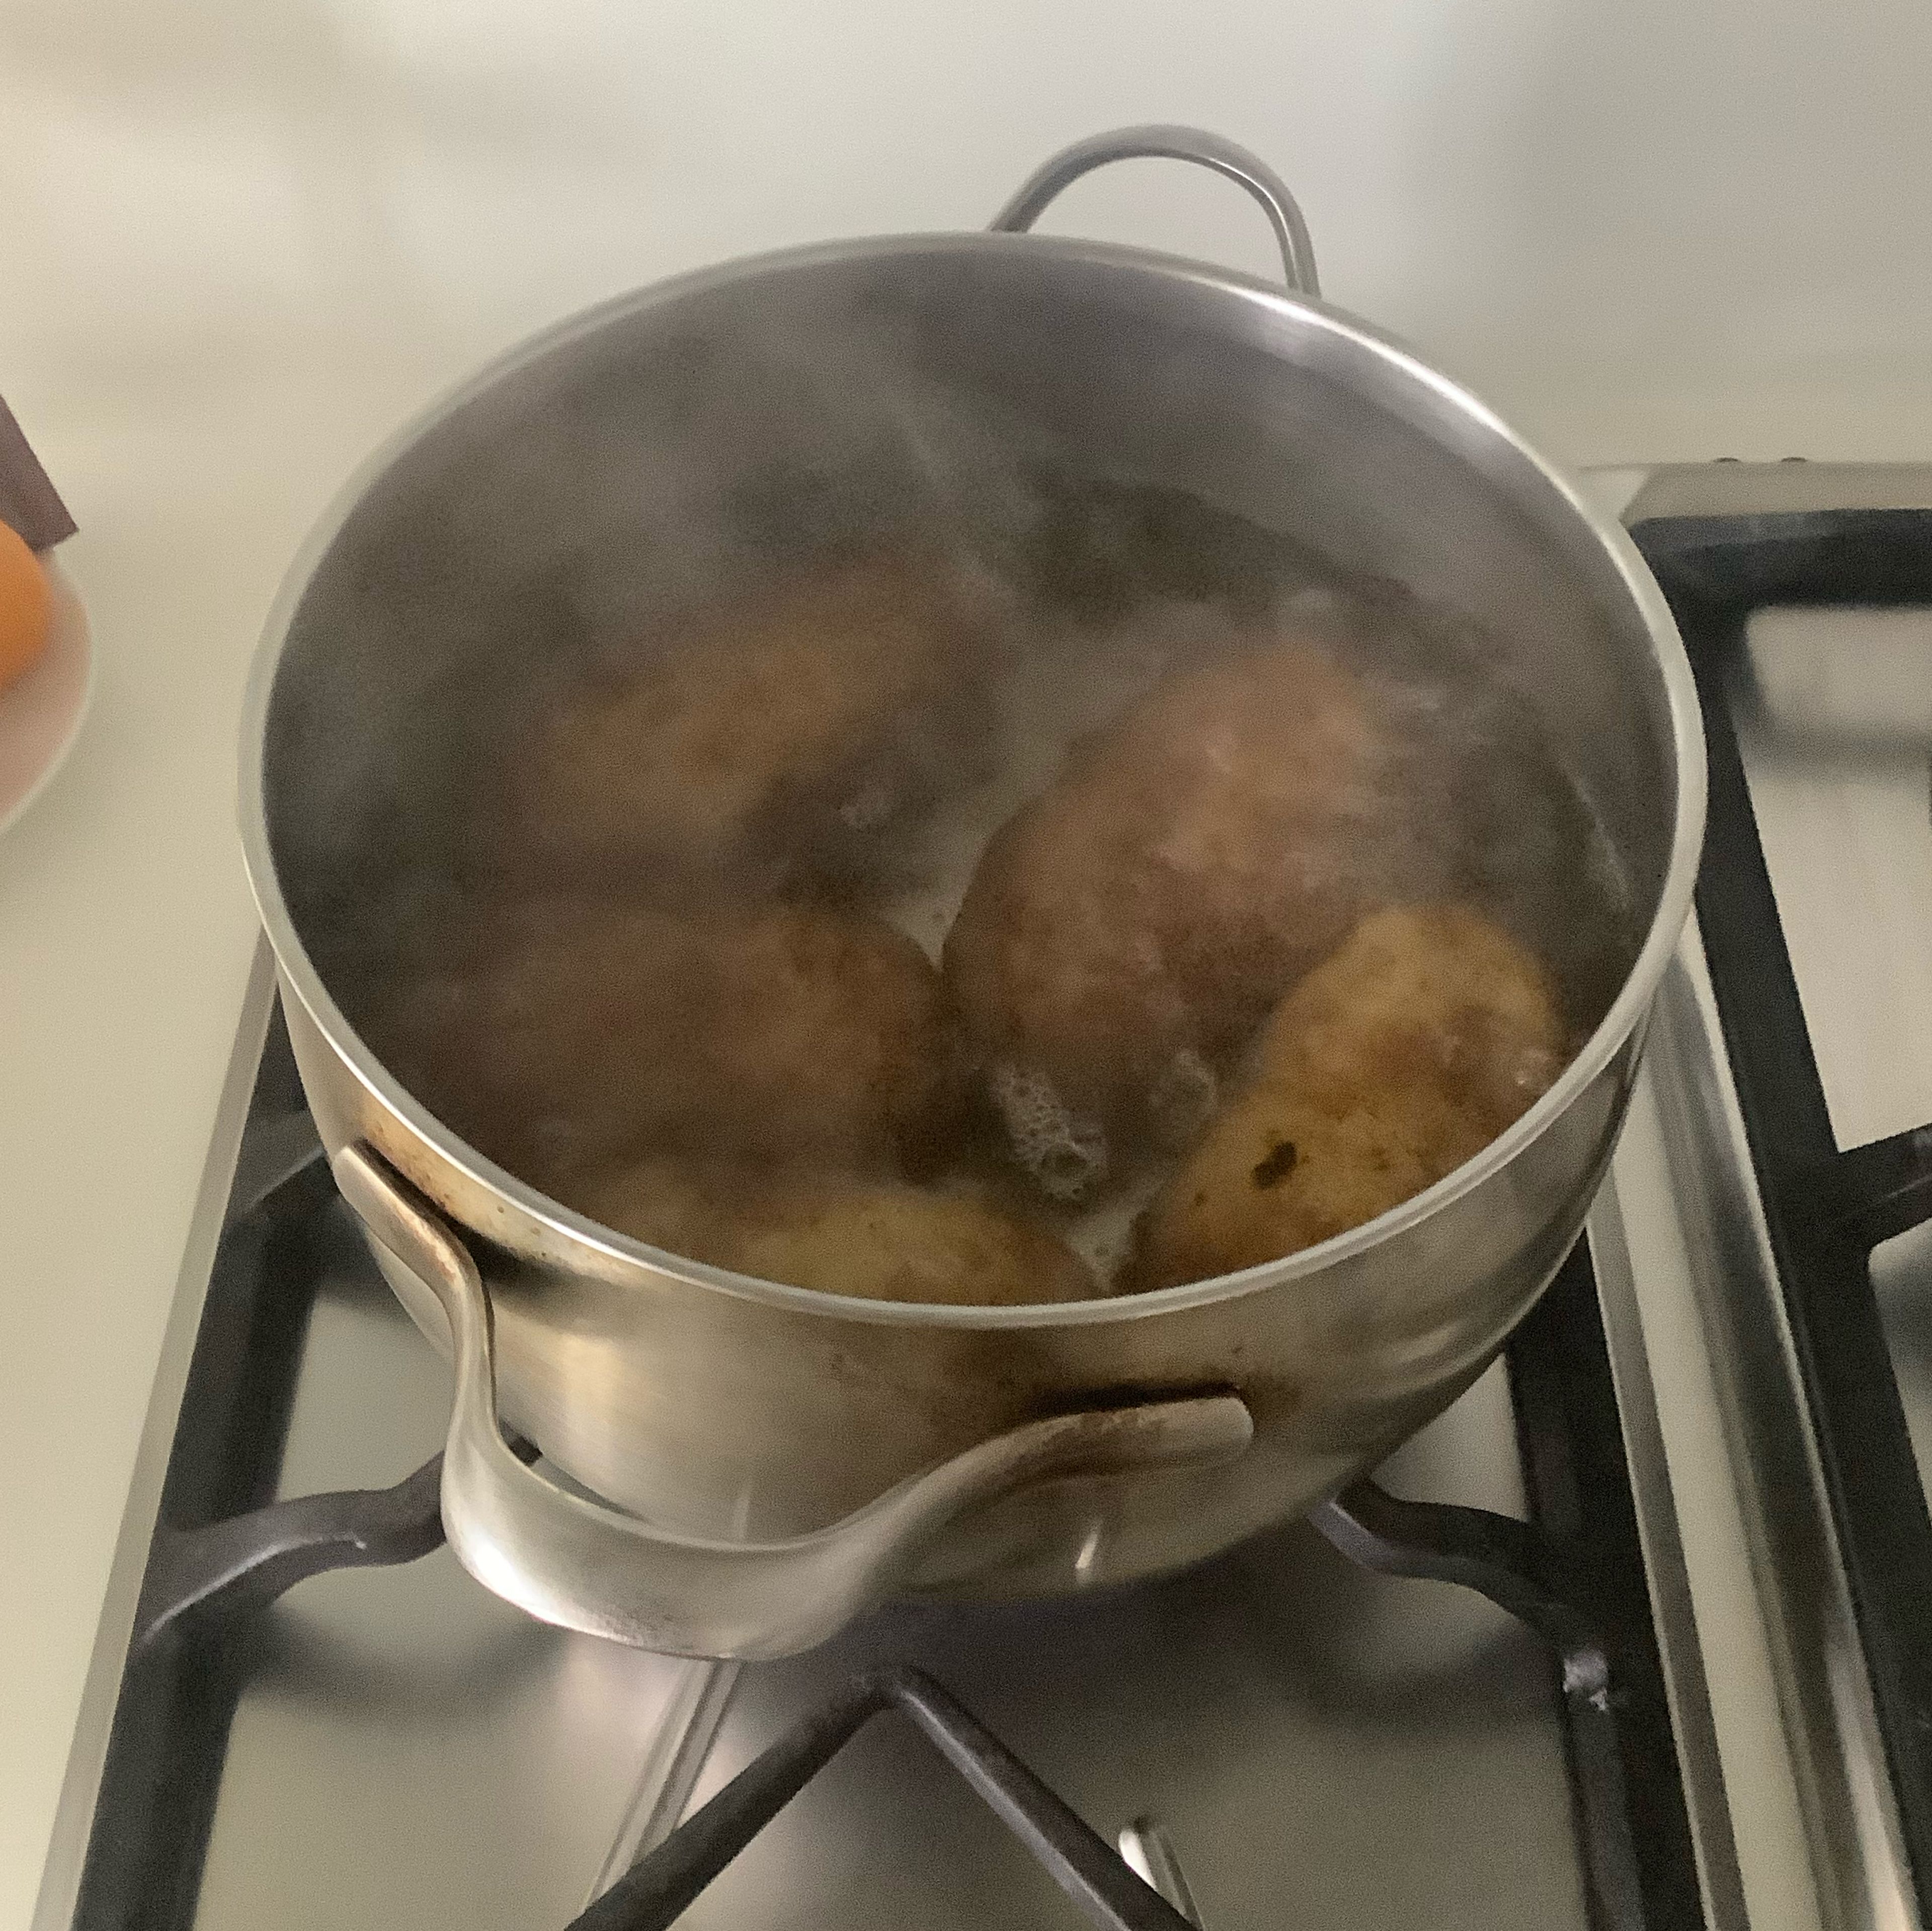 Rinse your potatoes, and then place them in boiling water for around 40 minutes